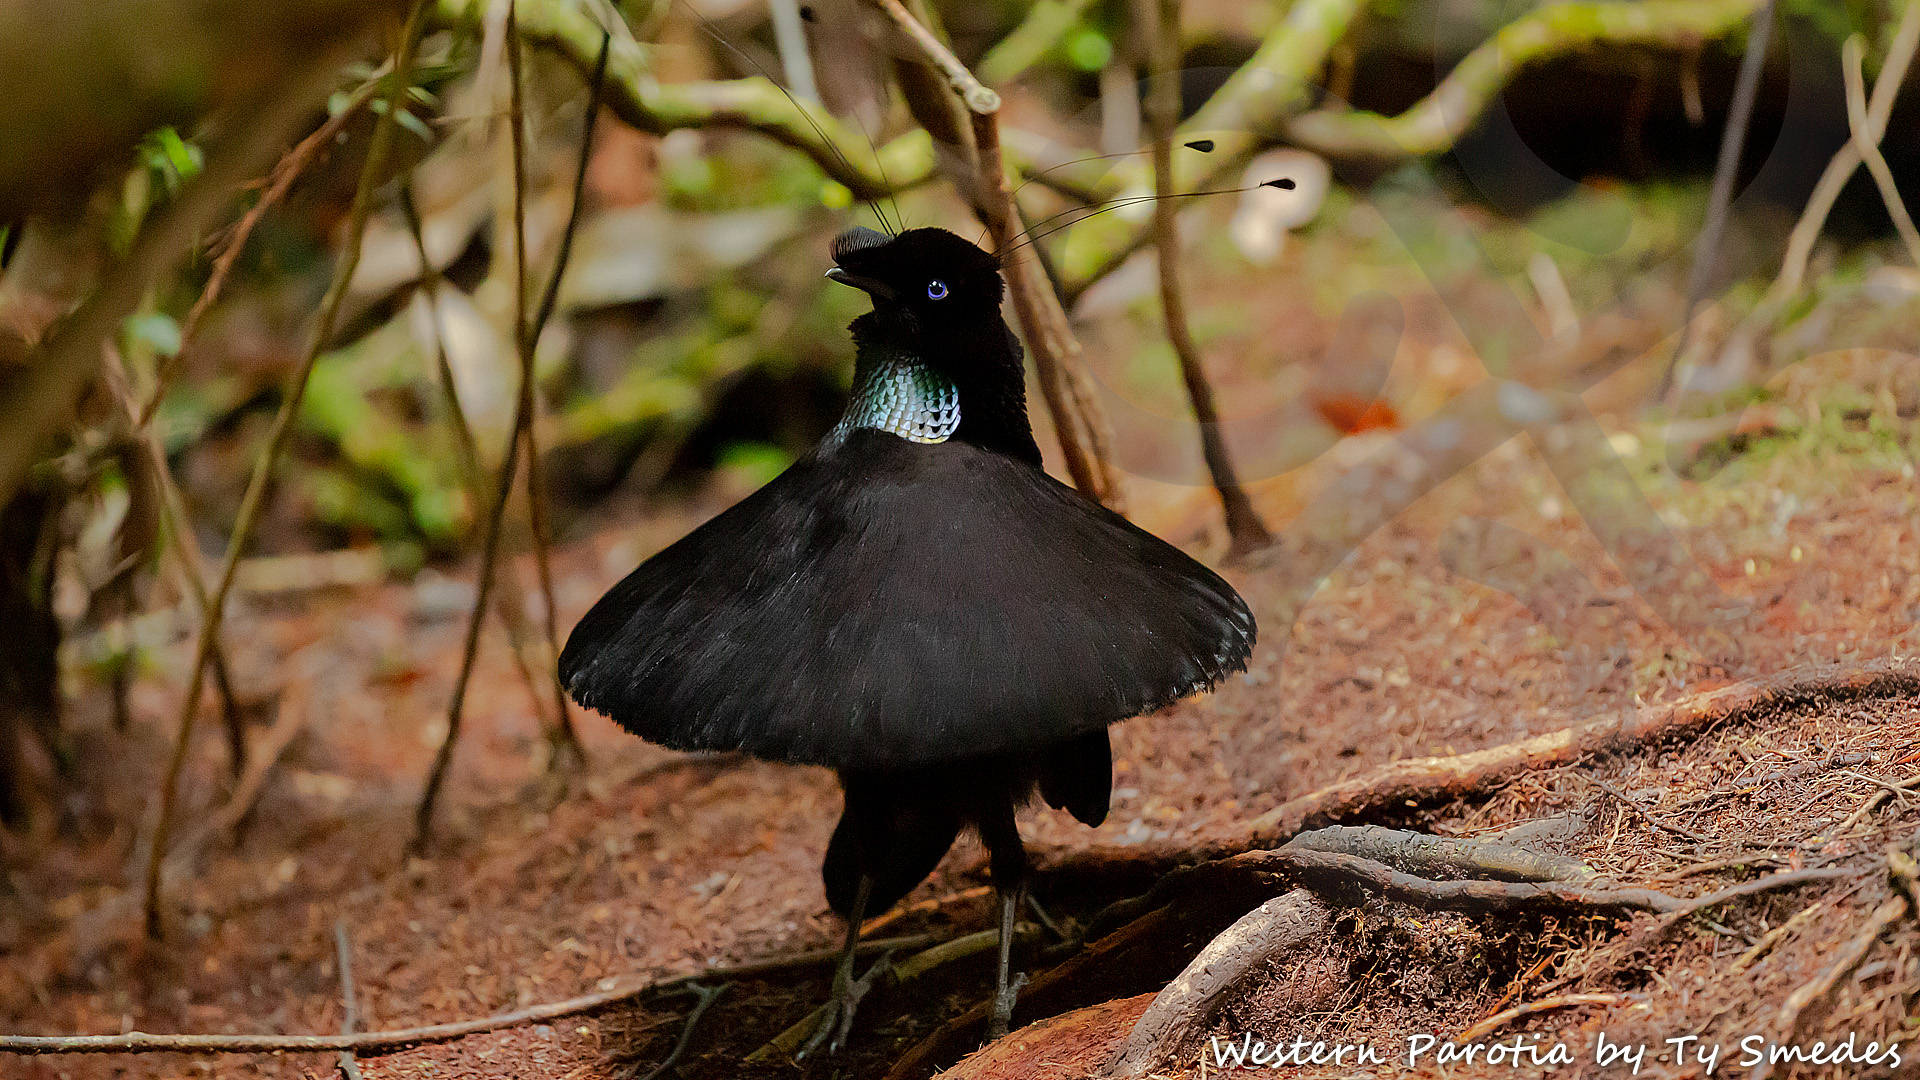 The ballerina-display of the adult male Western Parotia Parotia sefilata on its meticulously cleared ground court has to be witnessed to be believed. This amazing bird-of-paradise is but one of 66 bird species endemic to West Papua, where it occurs at mid-elevations in the Arfak, Tamrau and Wandammen Mountains. Copyright © Ty Smedes